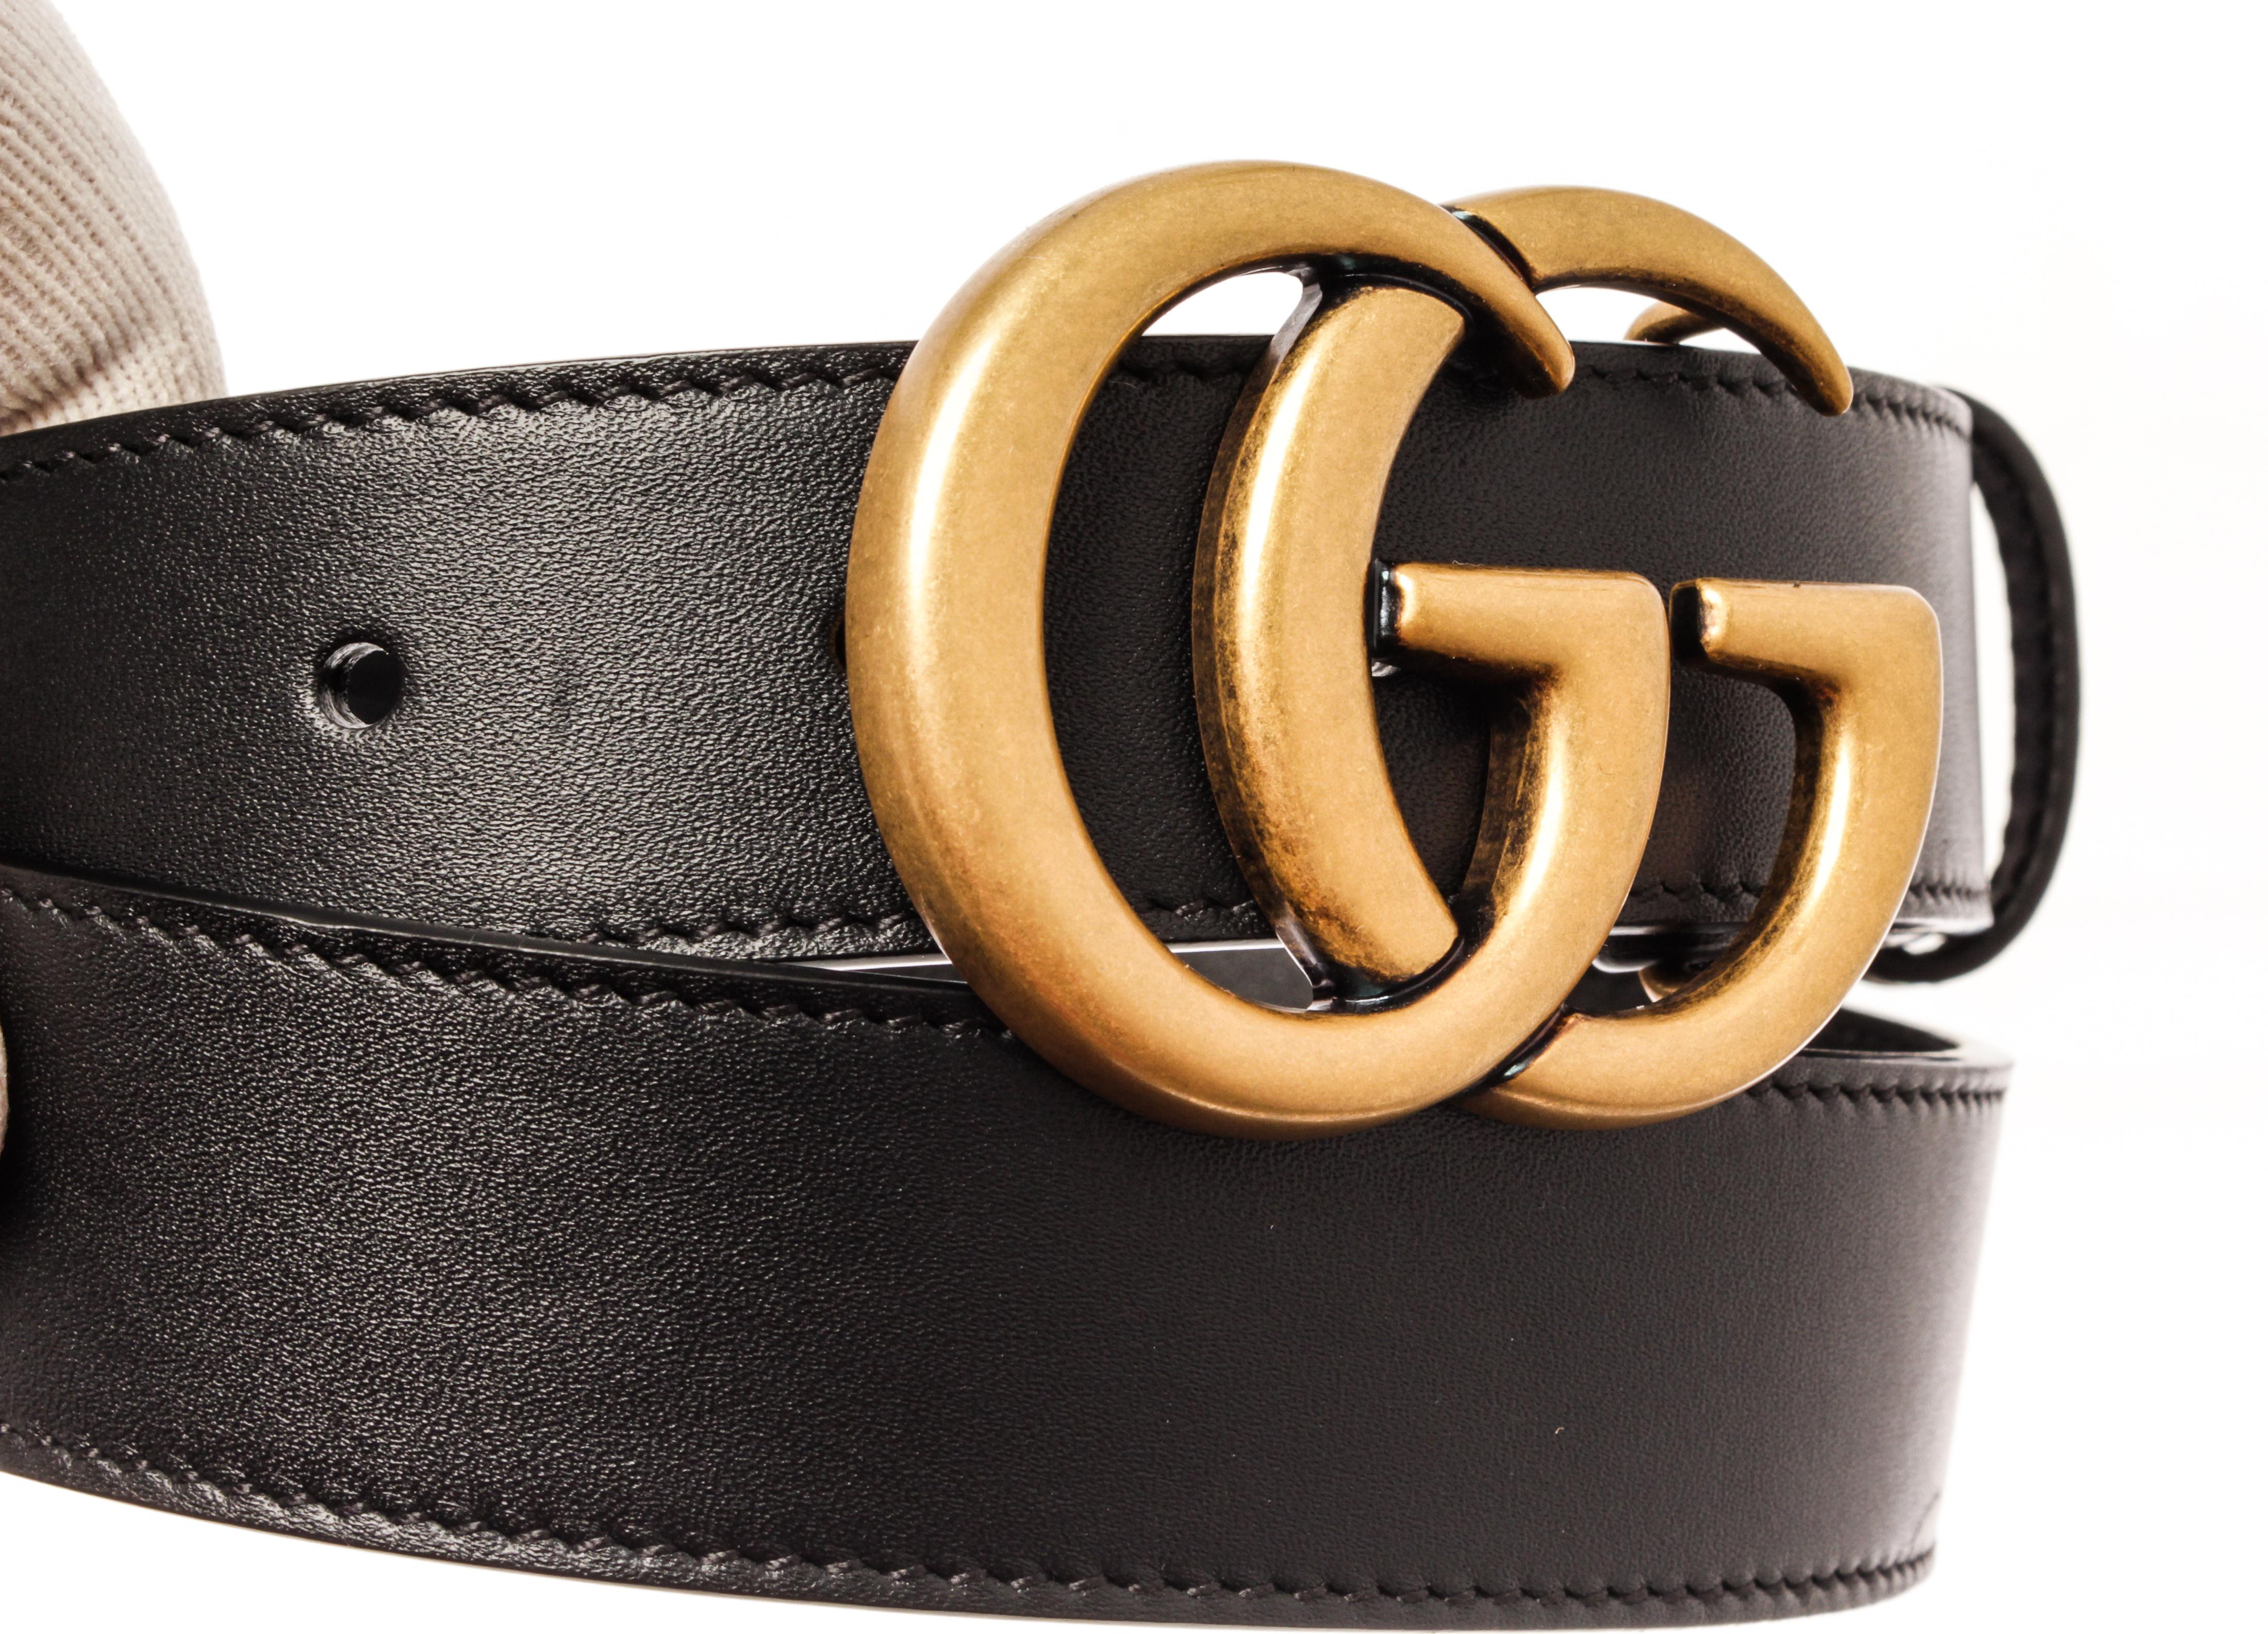 Gucci Black Calfskin Marmont GG Belt with this stylish belt is made of black calfskin leather and features an interlocking gg buckle in antique brass.

440267MSC